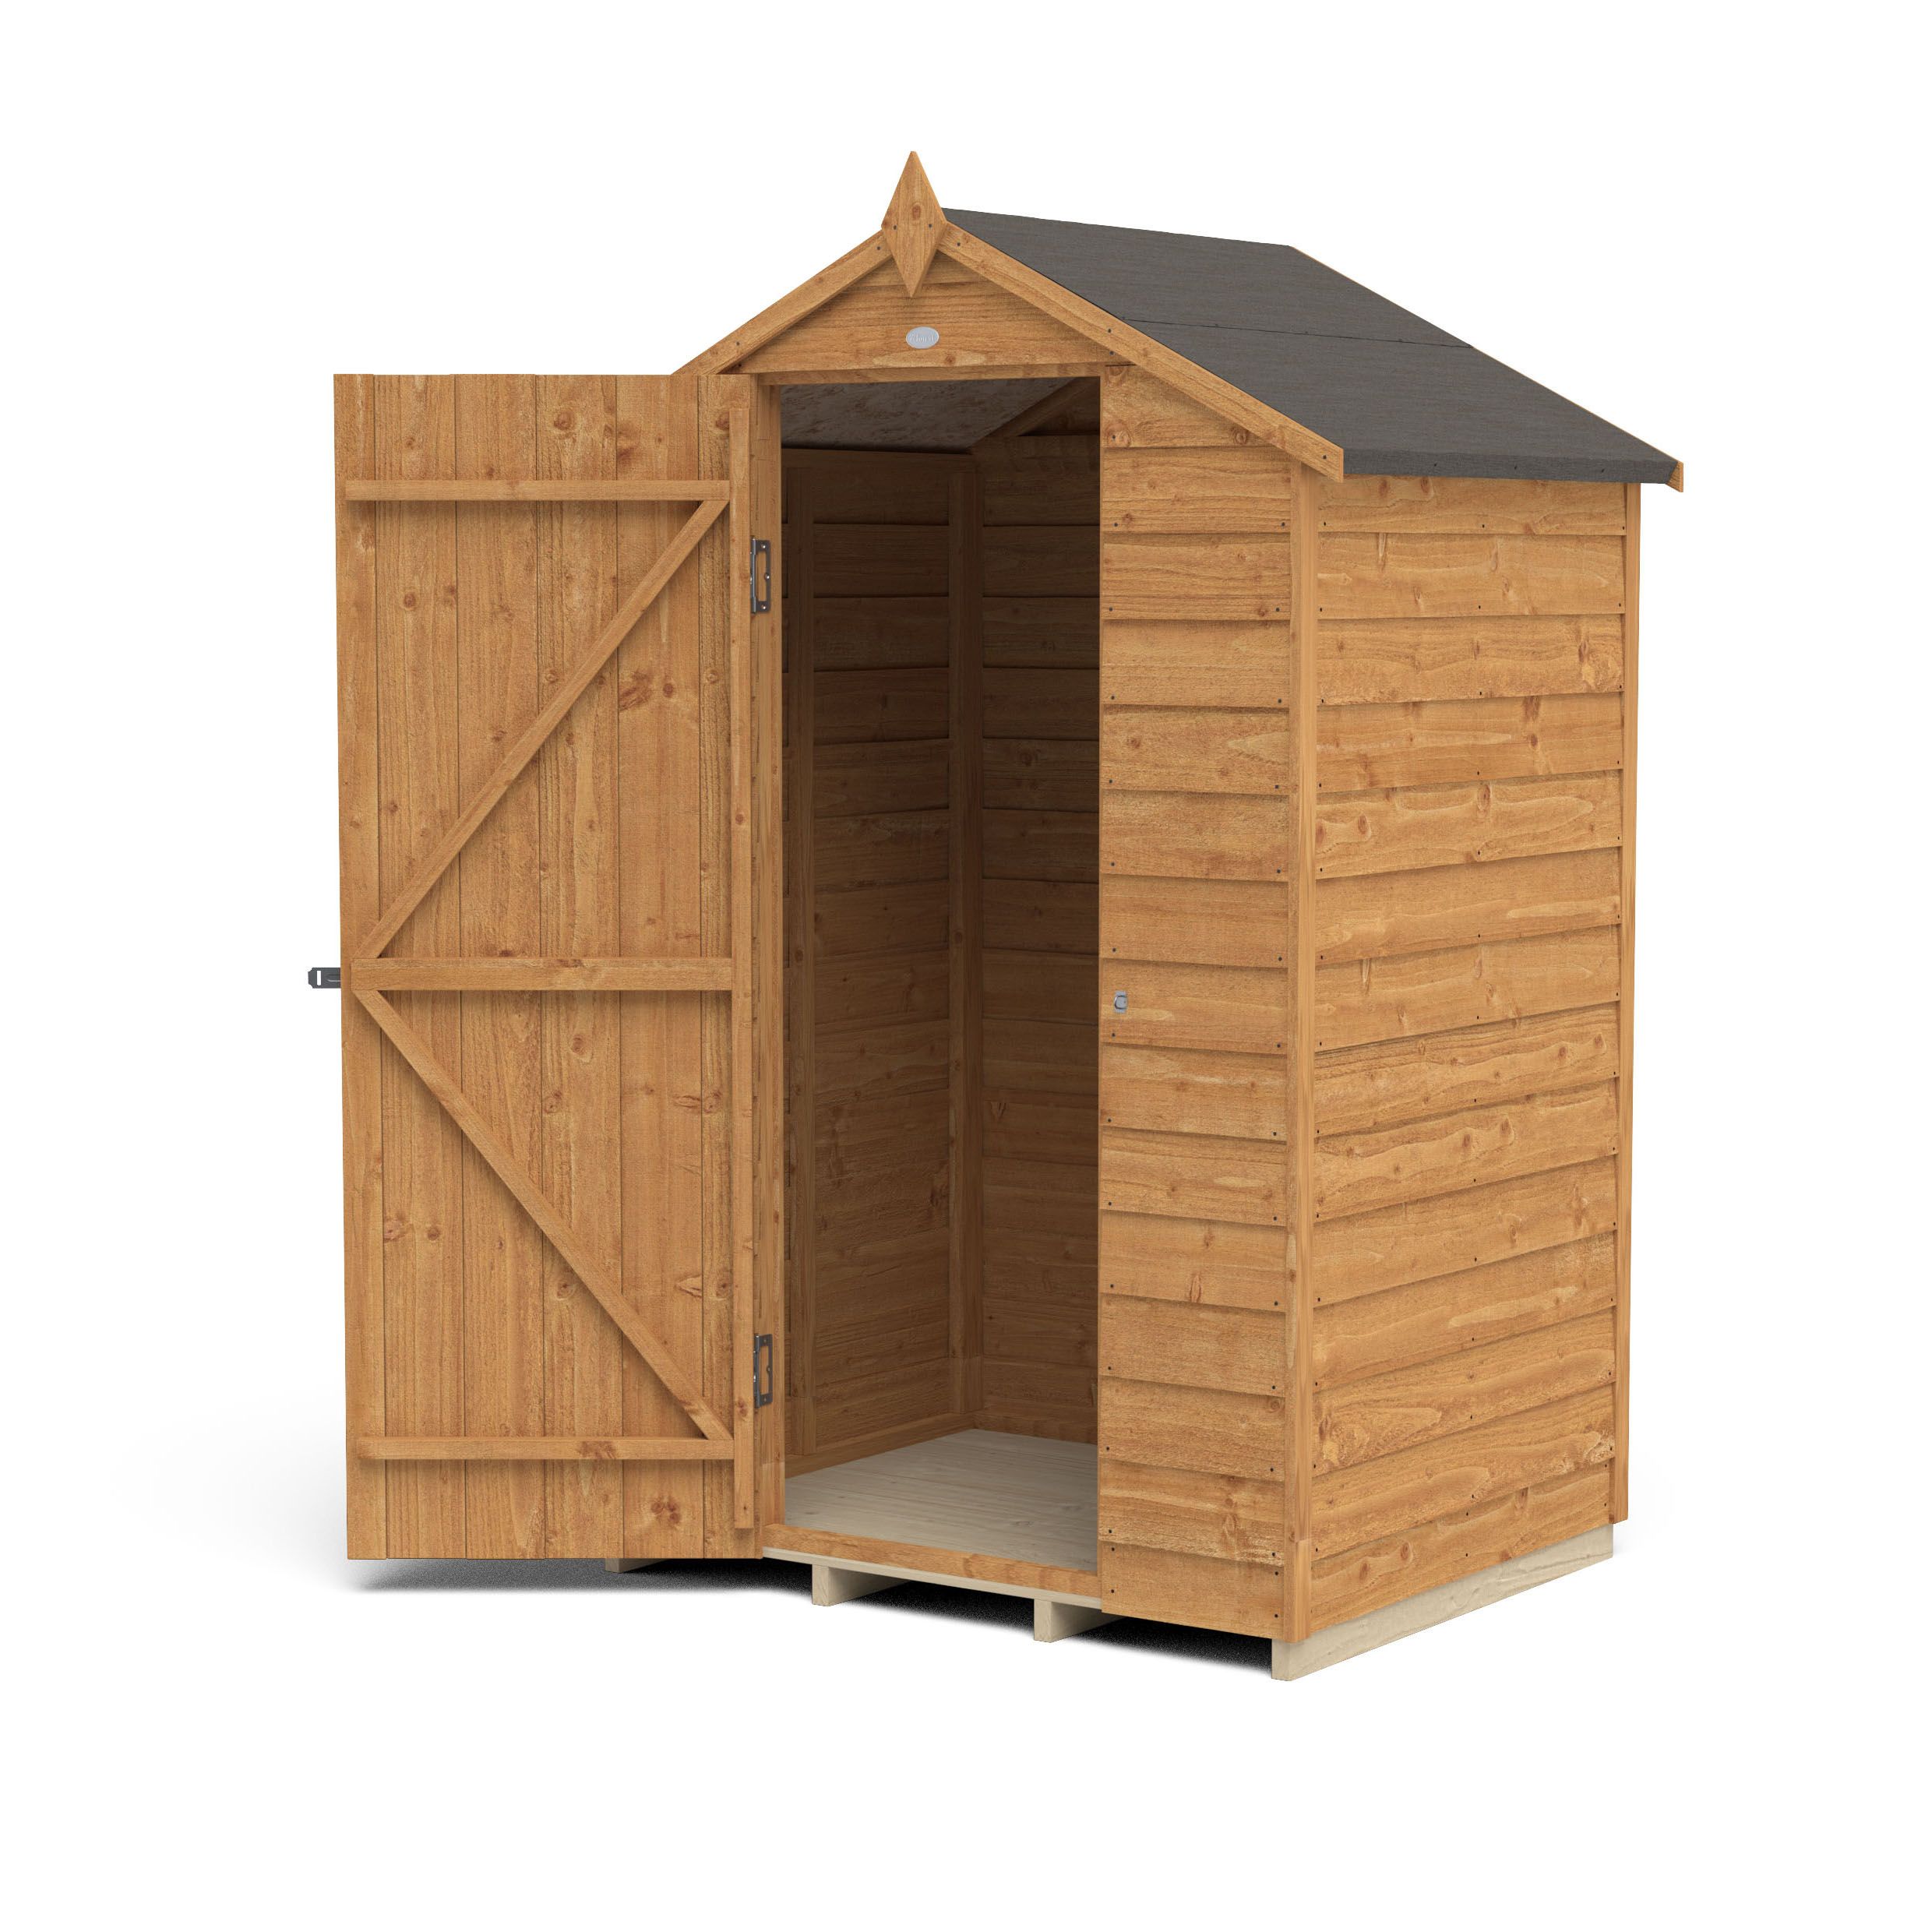 Forest Garden Overlap 4x3 ft Apex Wooden Dip treated Shed with floor (Base included)